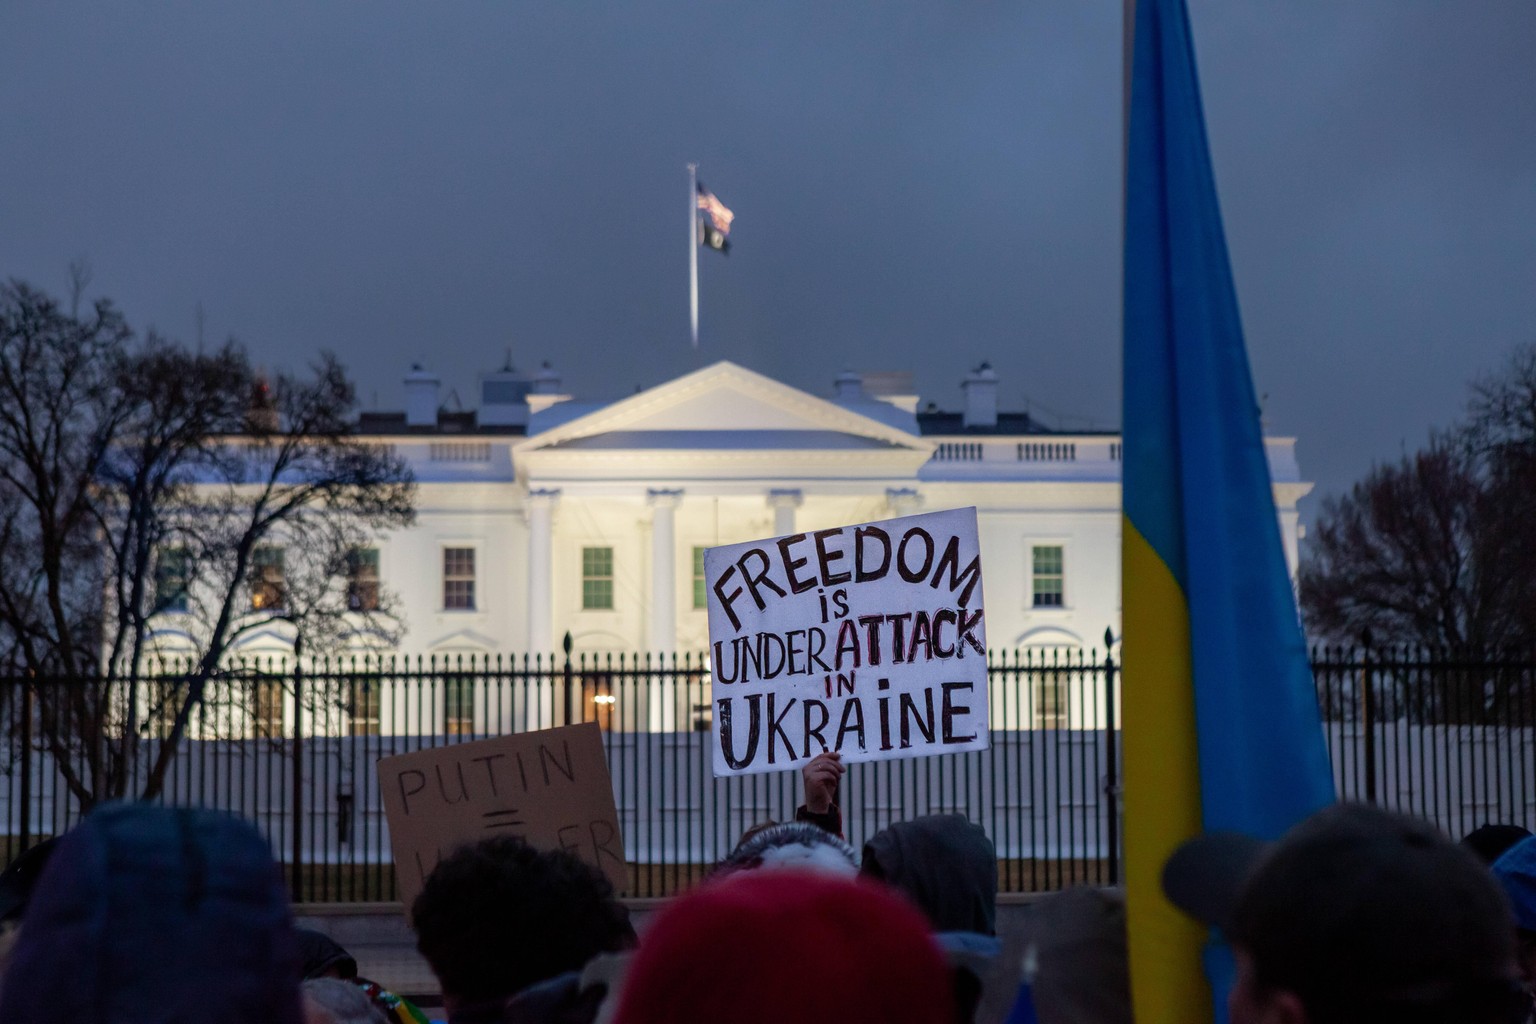 News Bilder des Tages Hundreds attend rally against Russian invasion of Ukraine in Washington, DC A sign states that freedom is under attack in Ukraine during a rally for Ukraine. Hundreds of people p ...